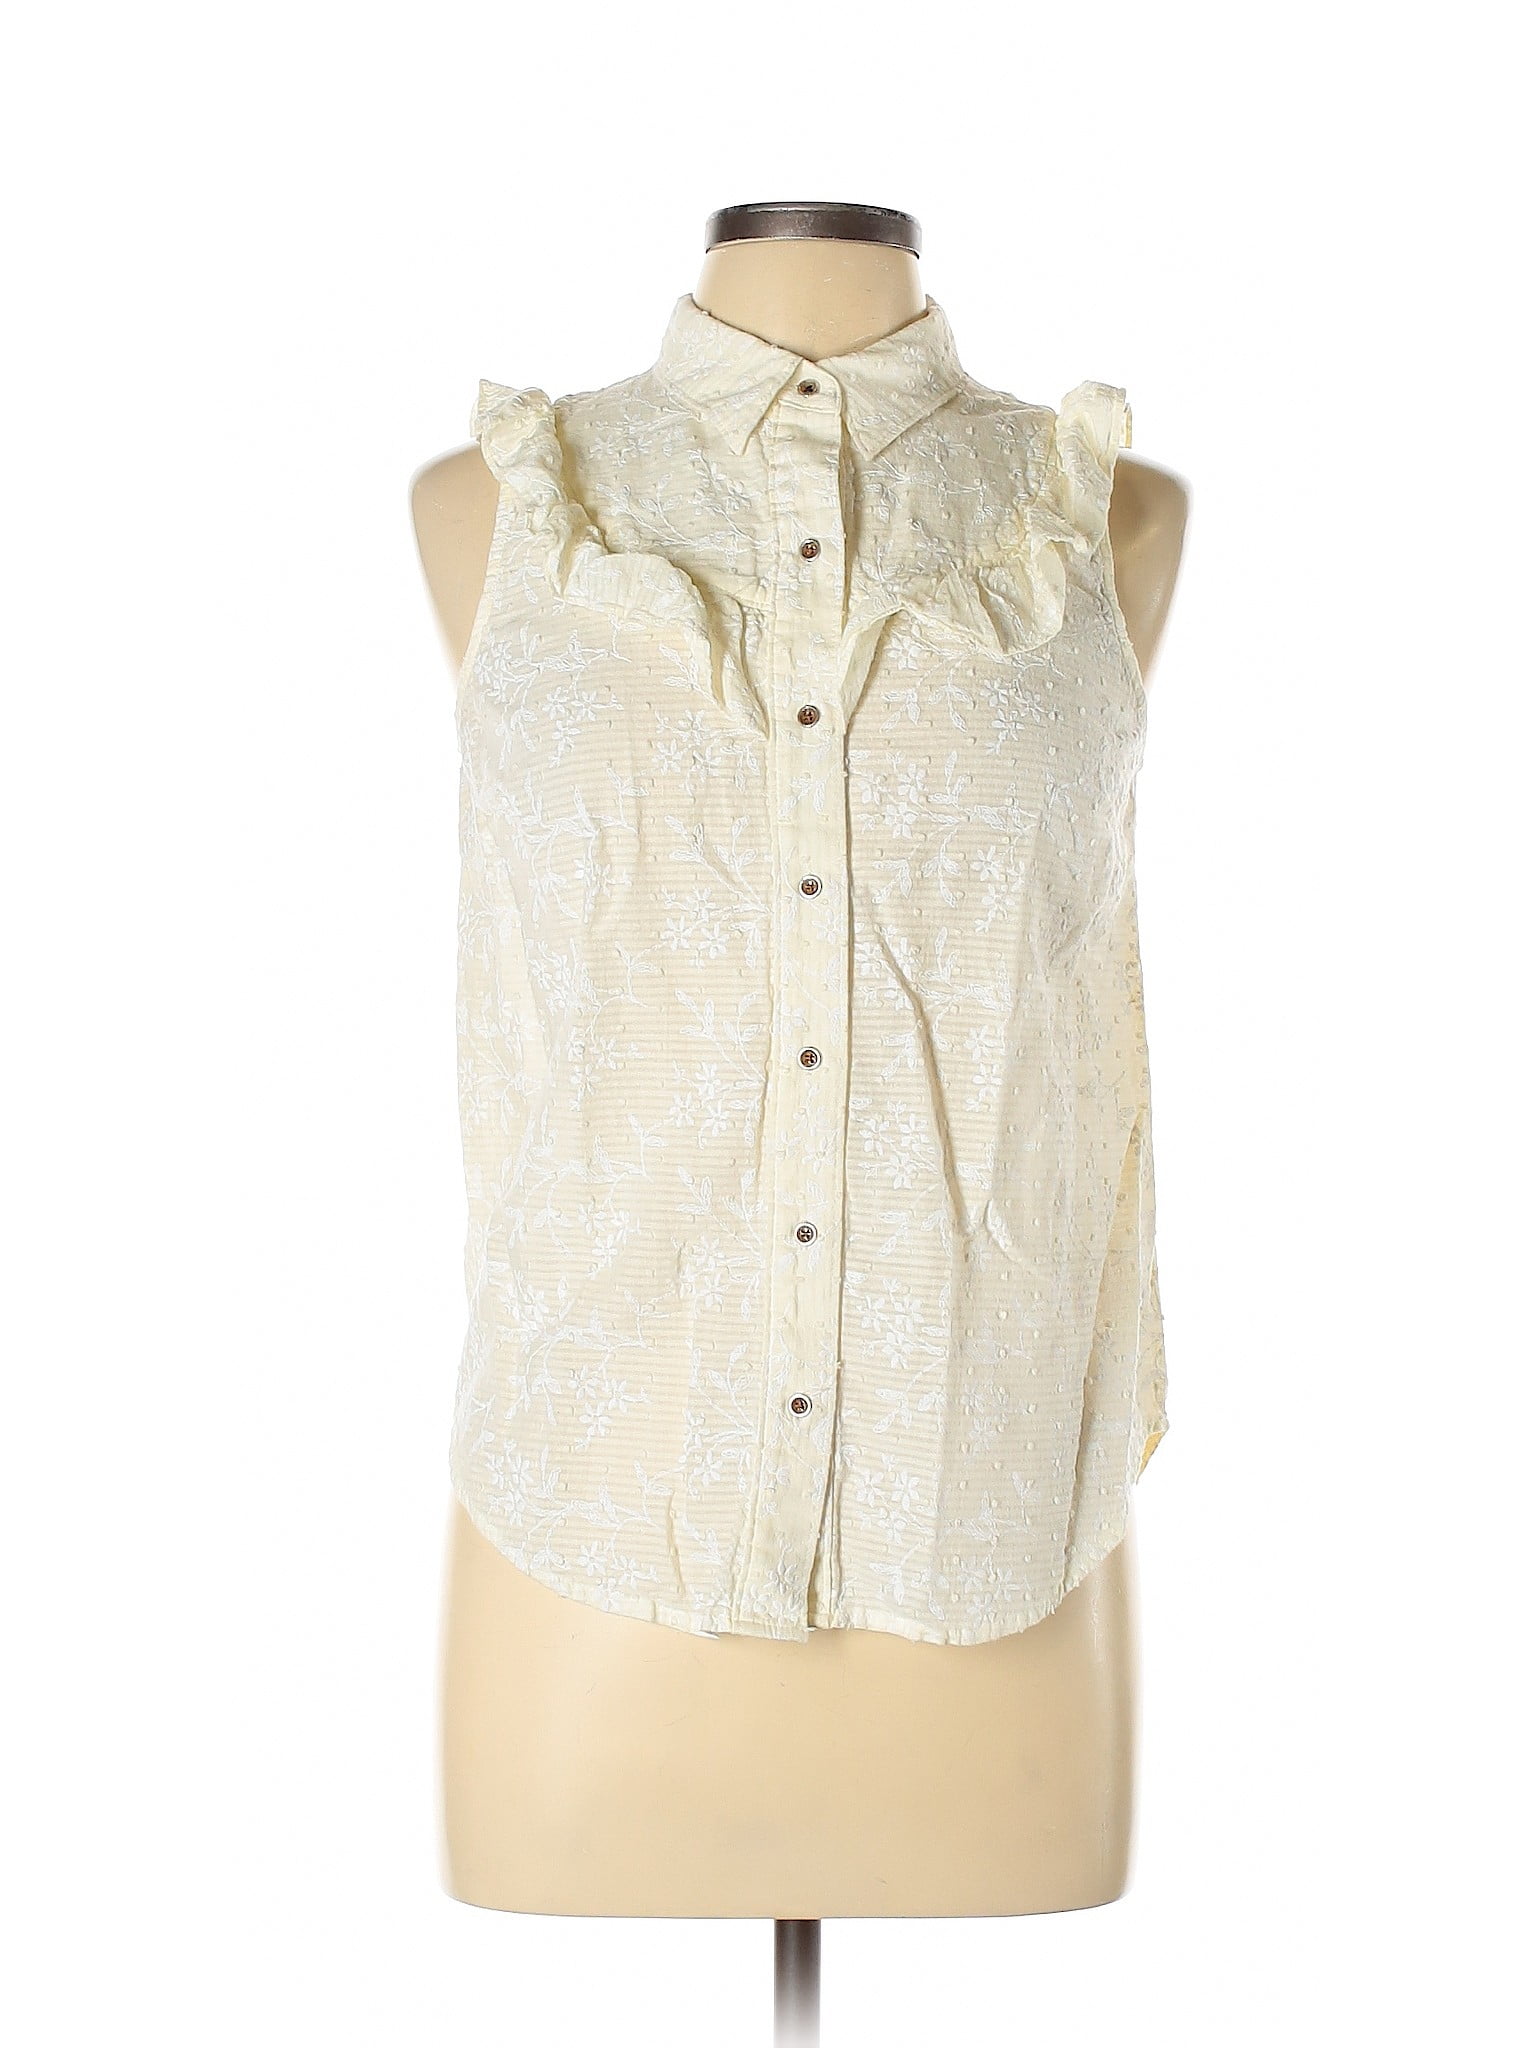 Maeve - Pre-Owned Maeve Women's Size 10 Sleeveless Button-Down Shirt ...